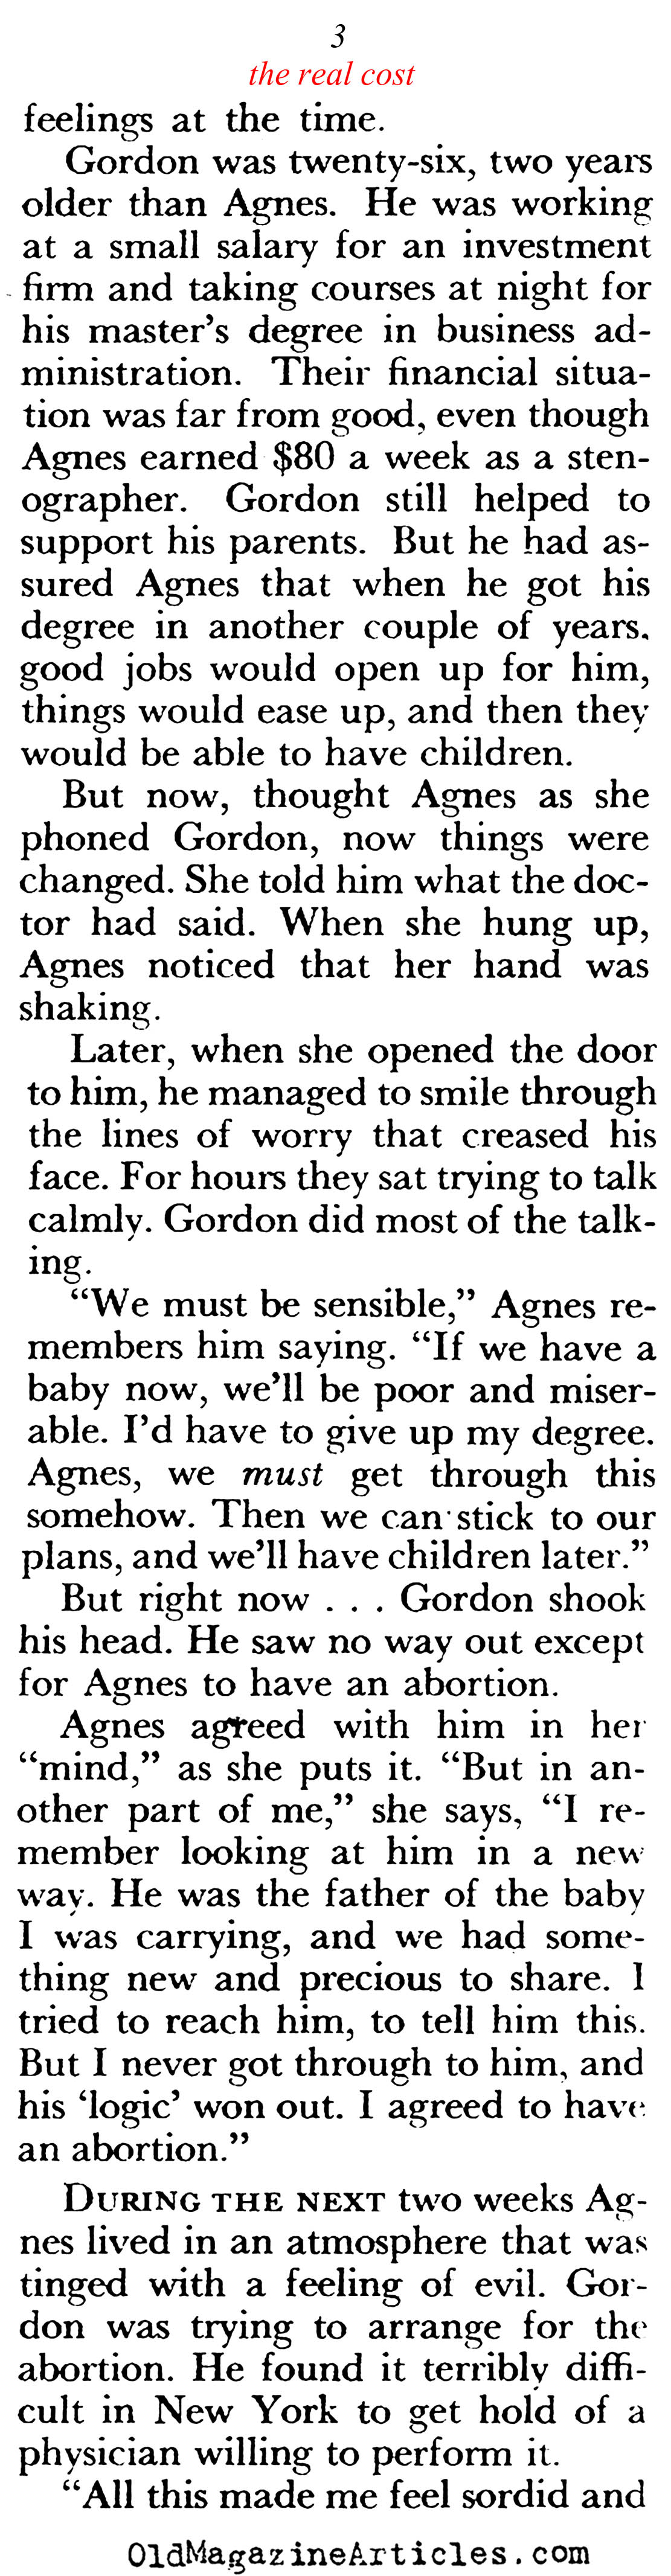 Deepest Regrets (Pageant Magazine, 1958)